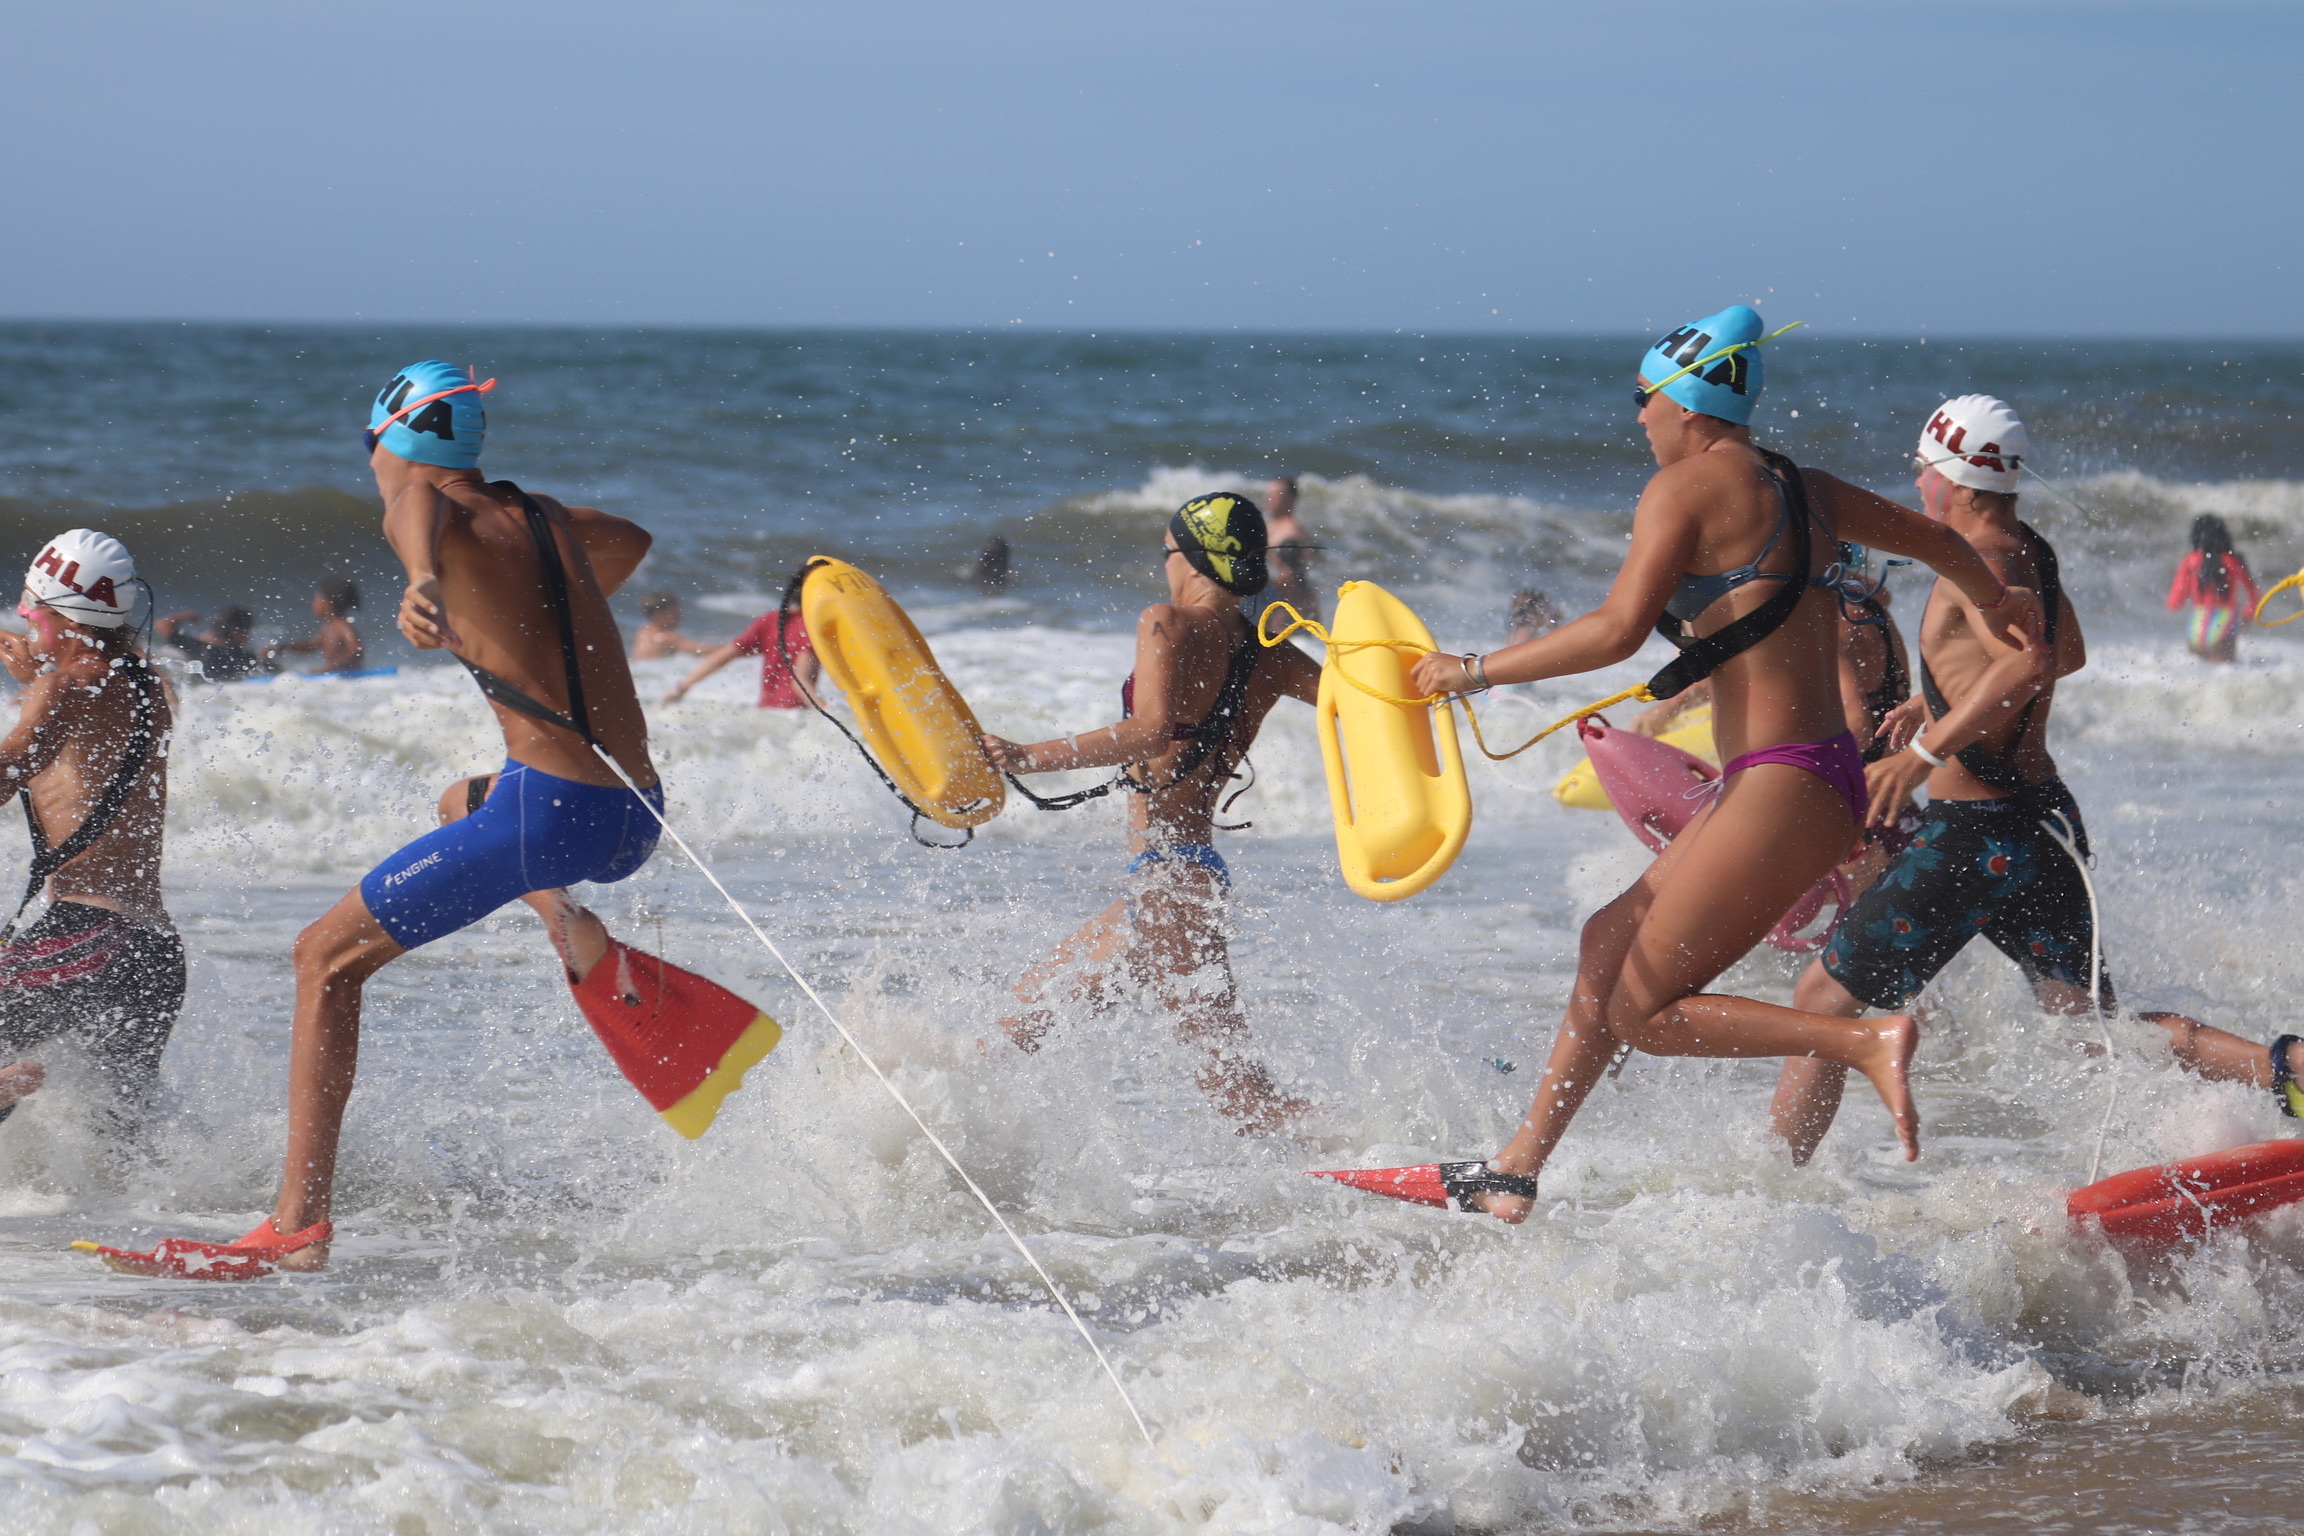 ‘A’ group junior lifeguards enter the water during the torpedo rescue. CINTIA PARSONS